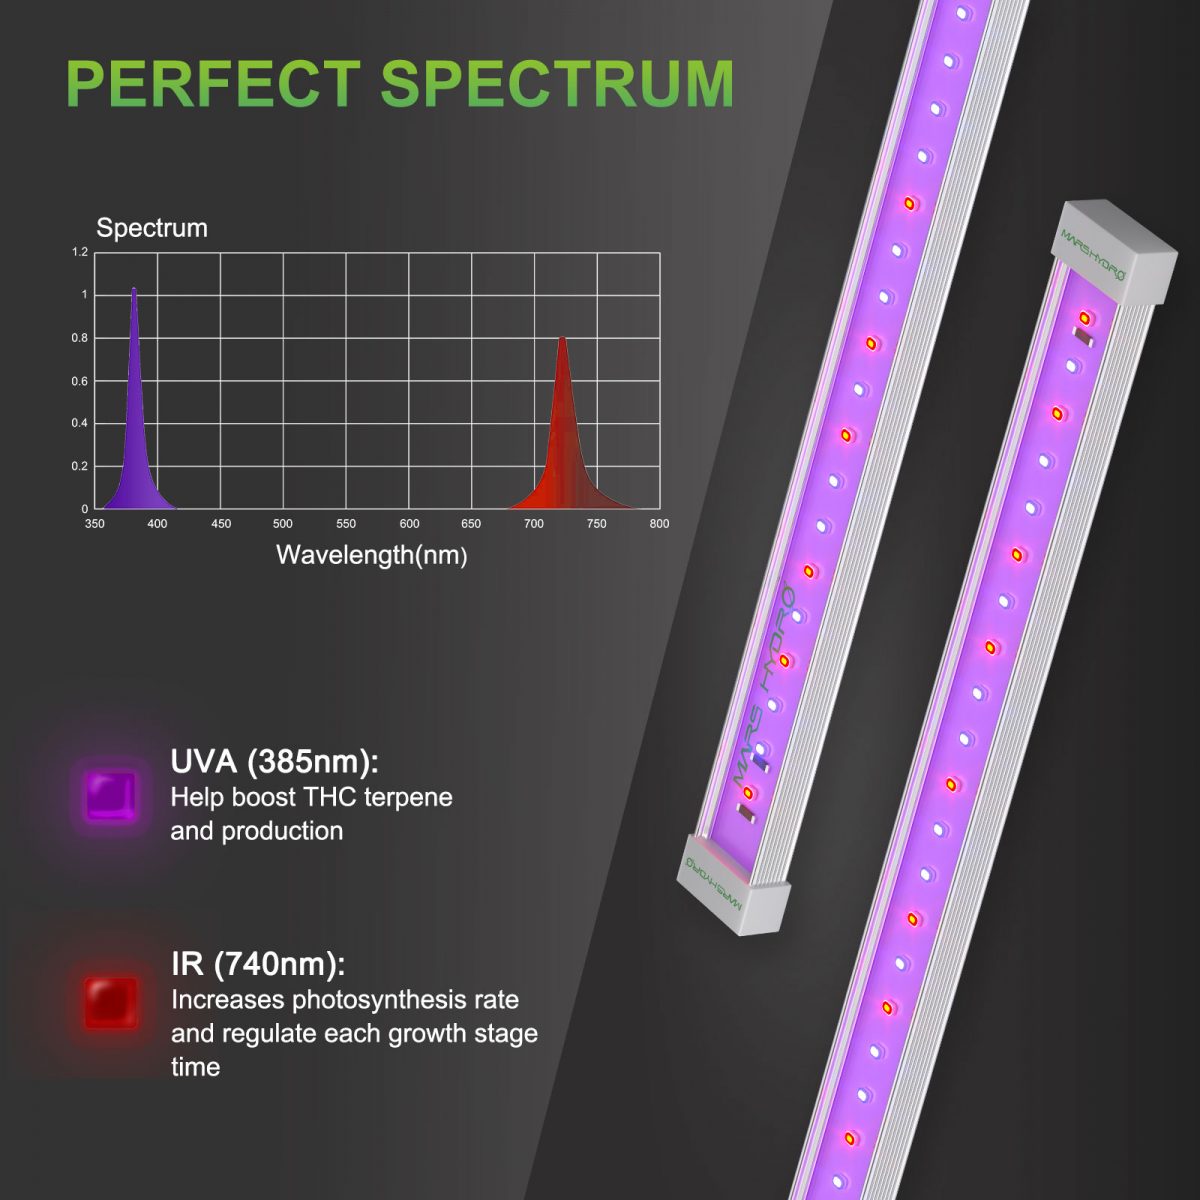 Separate Control Of UV & IR: The UR45 supplemental light bars are equipped with a spectral switch that can be selected to turn ON/OFF UV light or IR light, respectively or simultaneously, for free configuration of the supplemental spectrum. Growers can use it as a UV grow light or an IR grow light according to the needs.